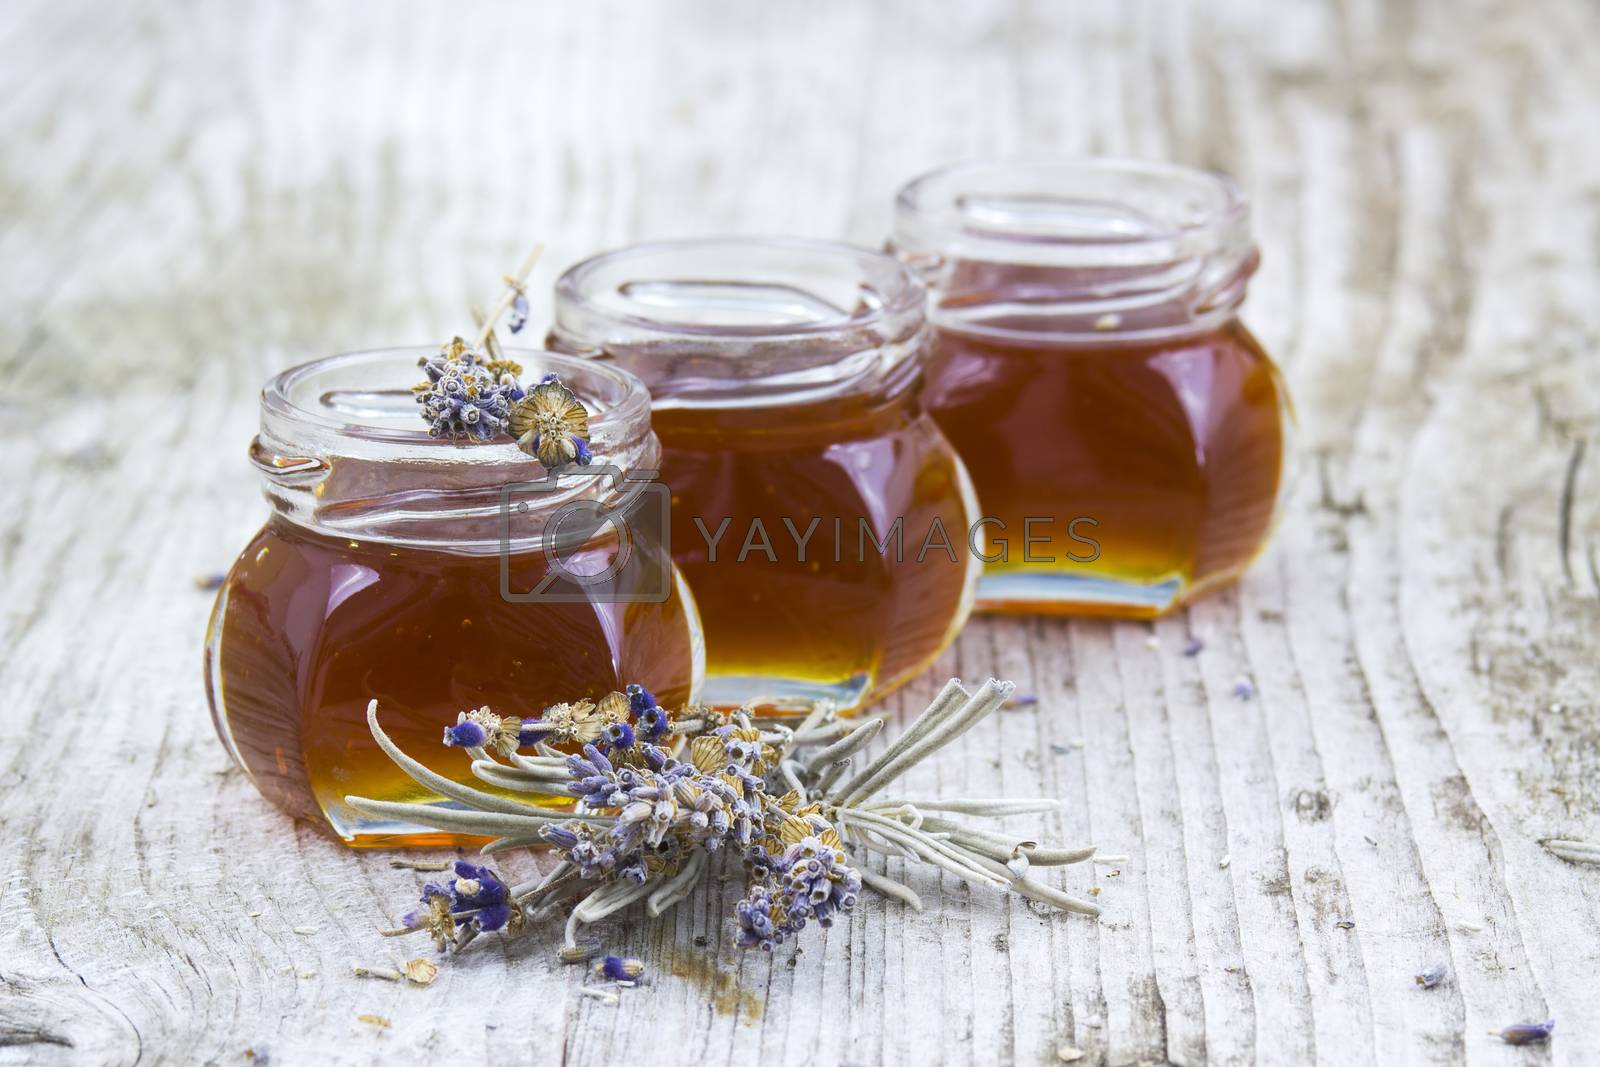 Royalty free image of herbal honey with lavender flowers by miradrozdowski